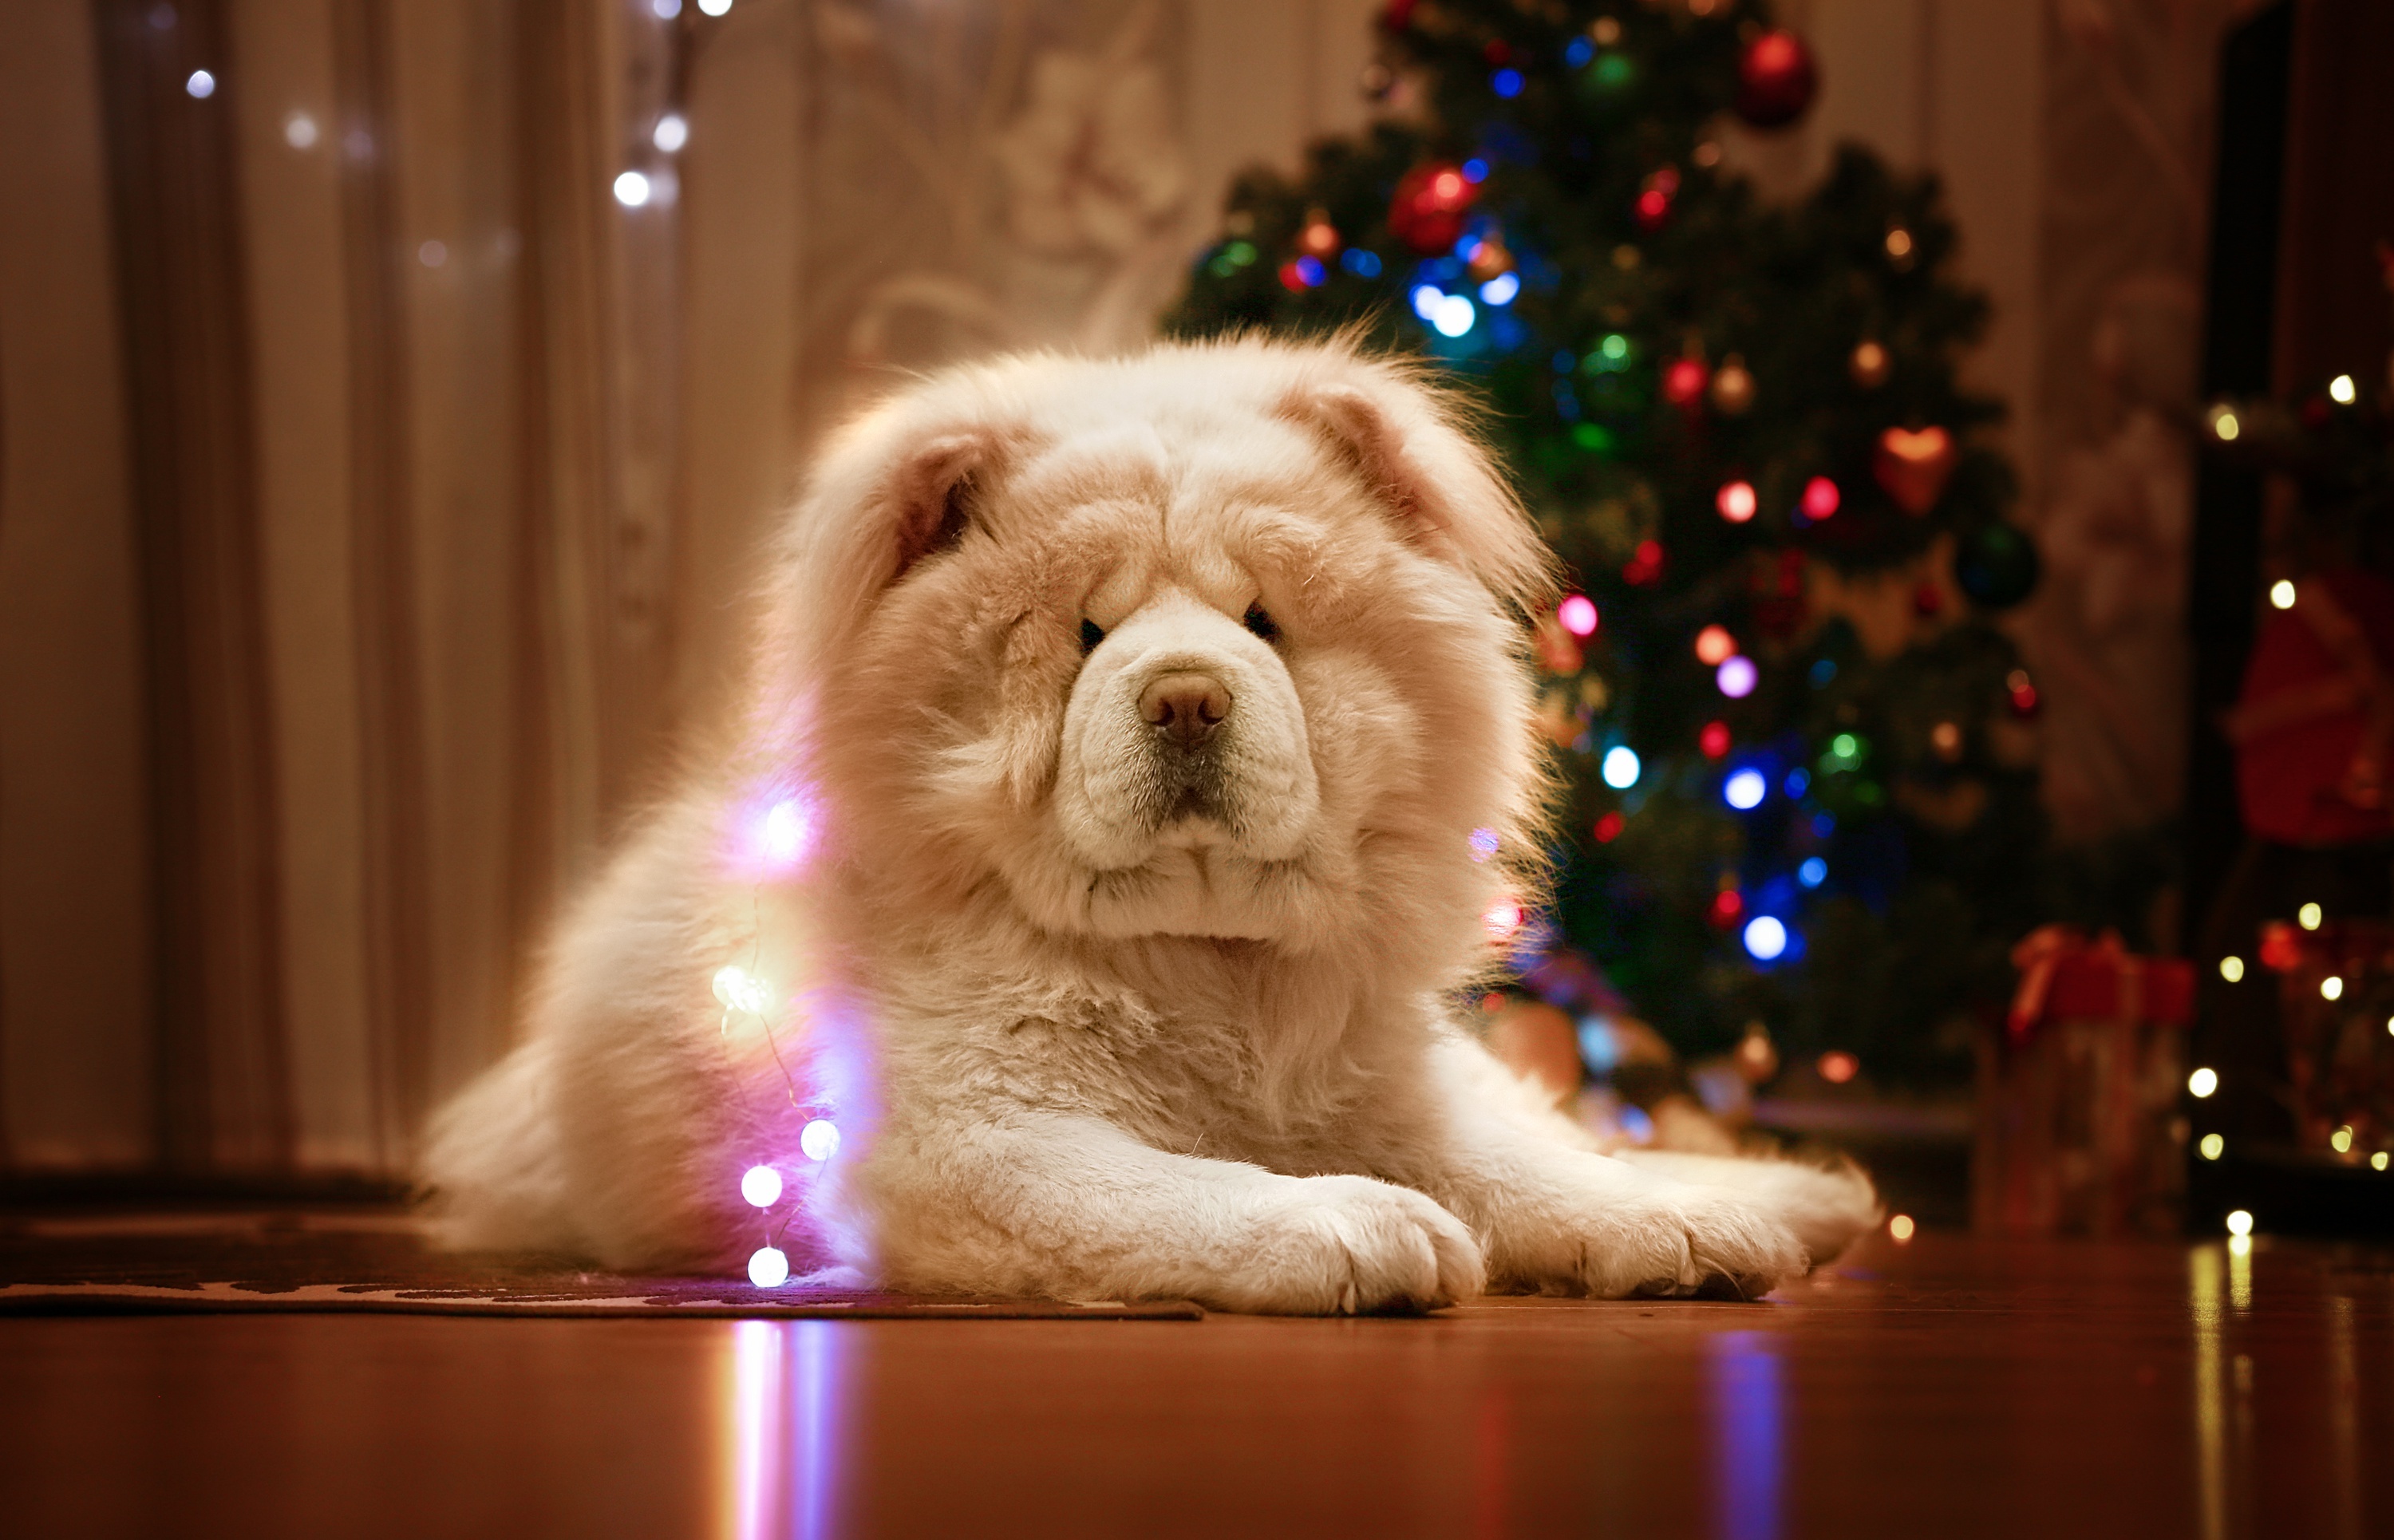 Chow Chow wallpapers, Visual delight, Captivating images, Lovely dogs, 3000x1930 HD Desktop